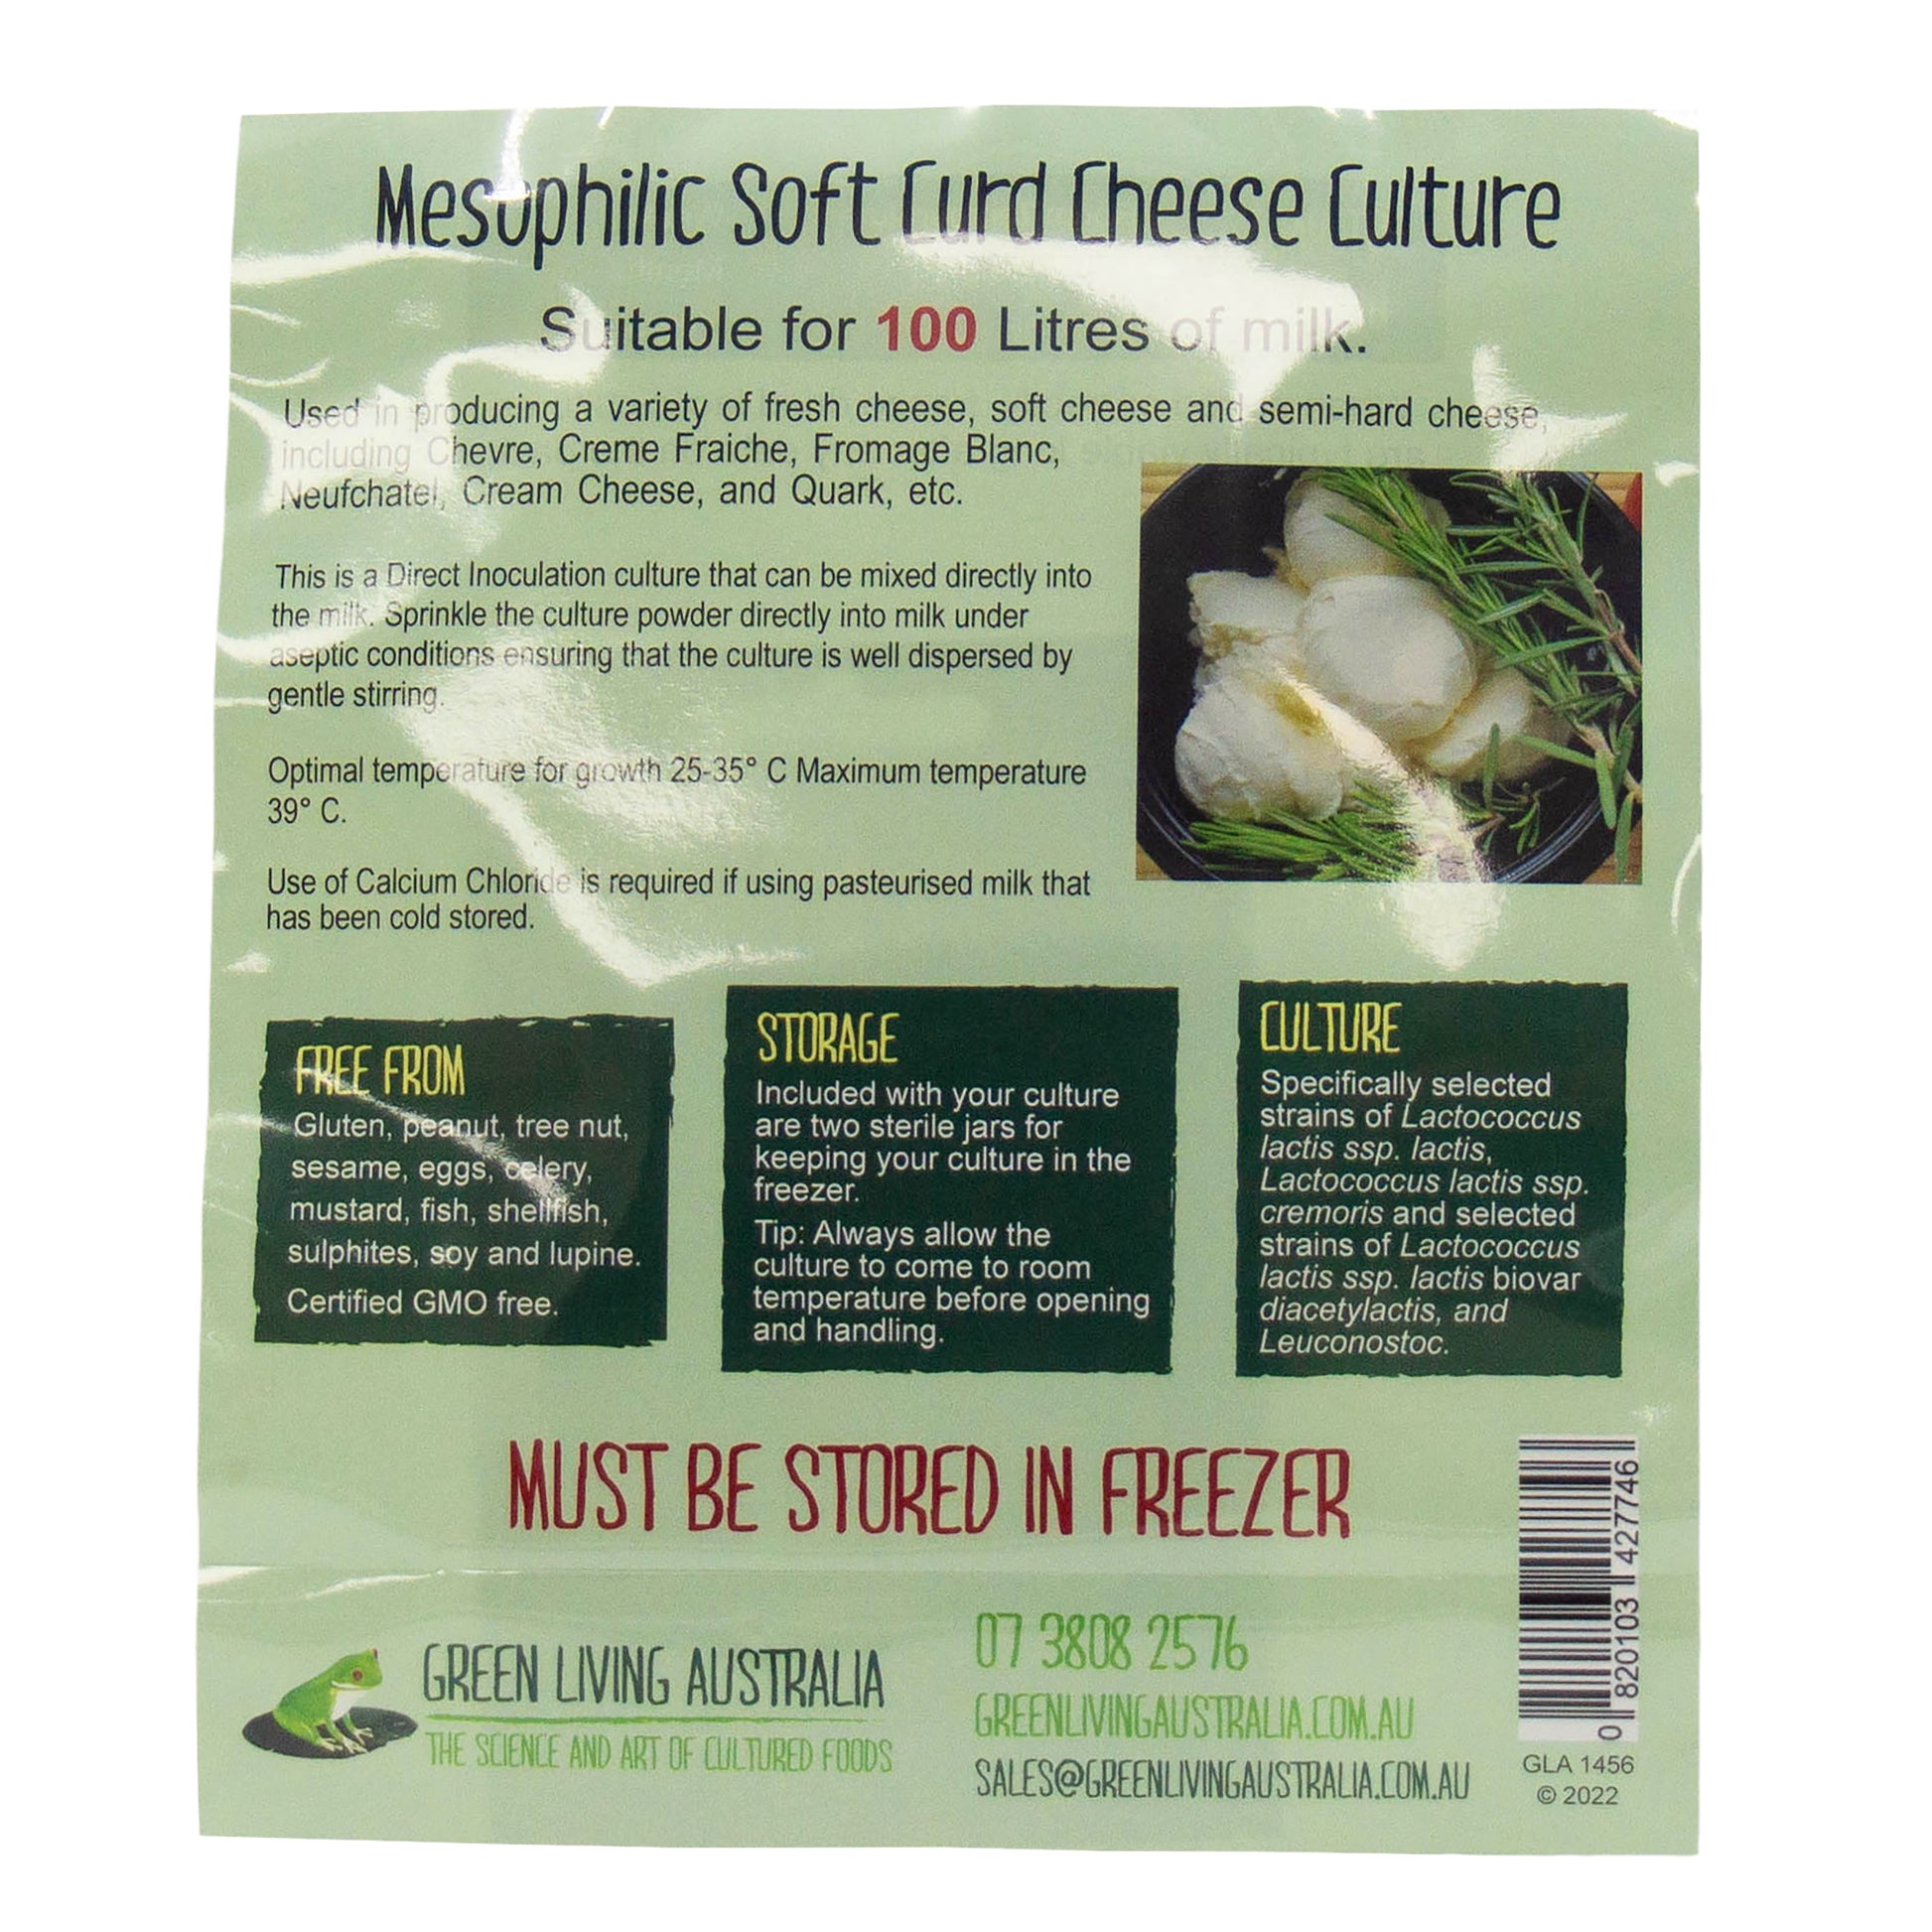 Mesophilic soft curd cheese culture suitable for up to 100 litres of milk. 